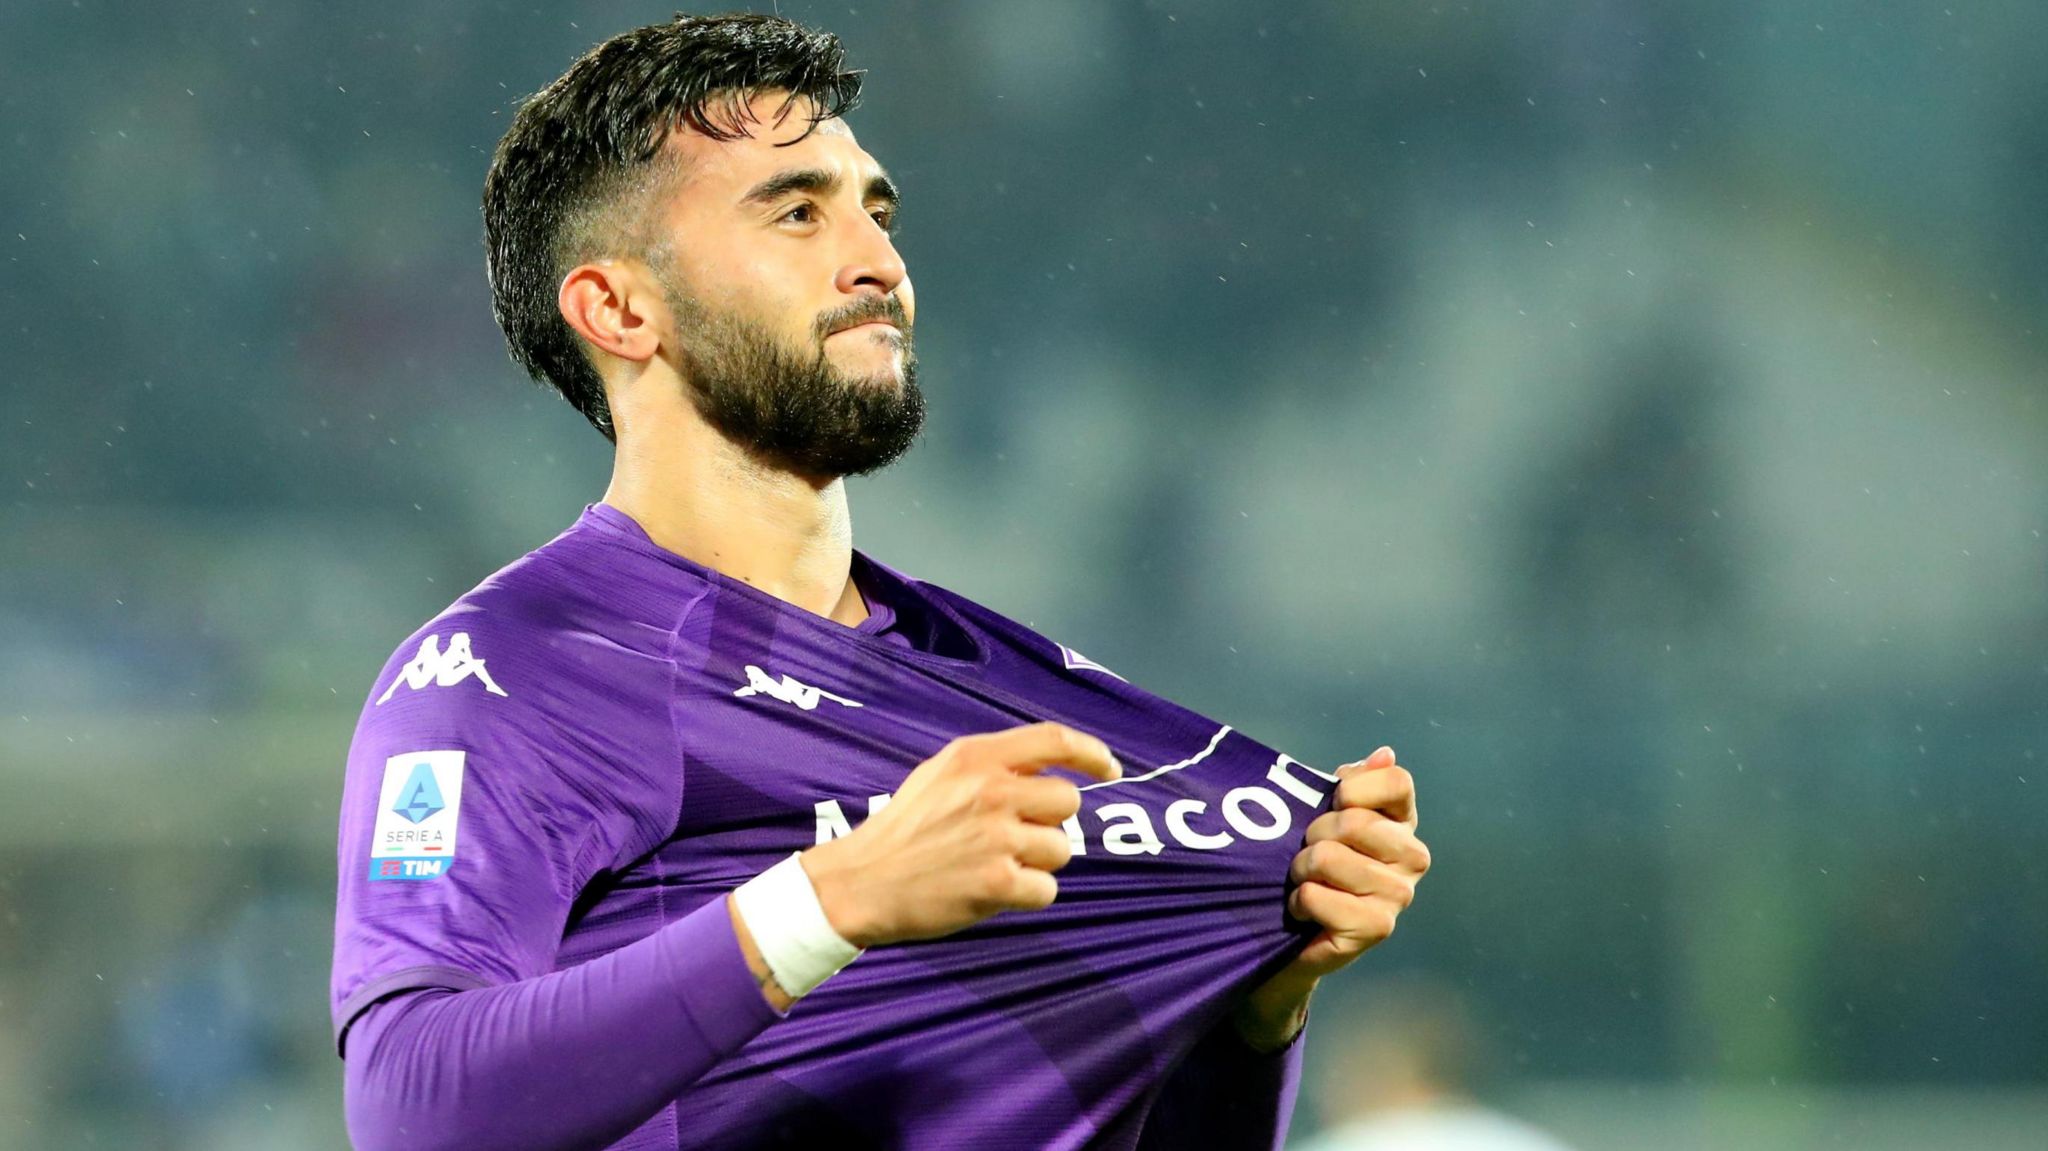 Leicester City: 'No agreement yet with Fiorentina or Gonzalez' - BBC Sport